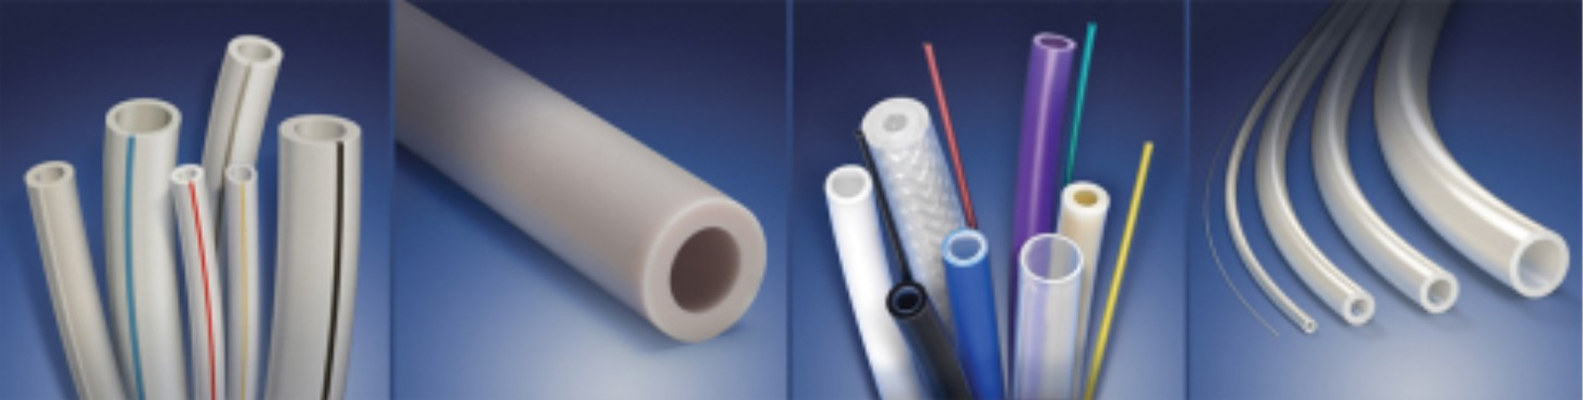 Medical and bioprocess single-unit component supplier Qosina has expanded its Class VI tubing portfolio to include 50 new products.